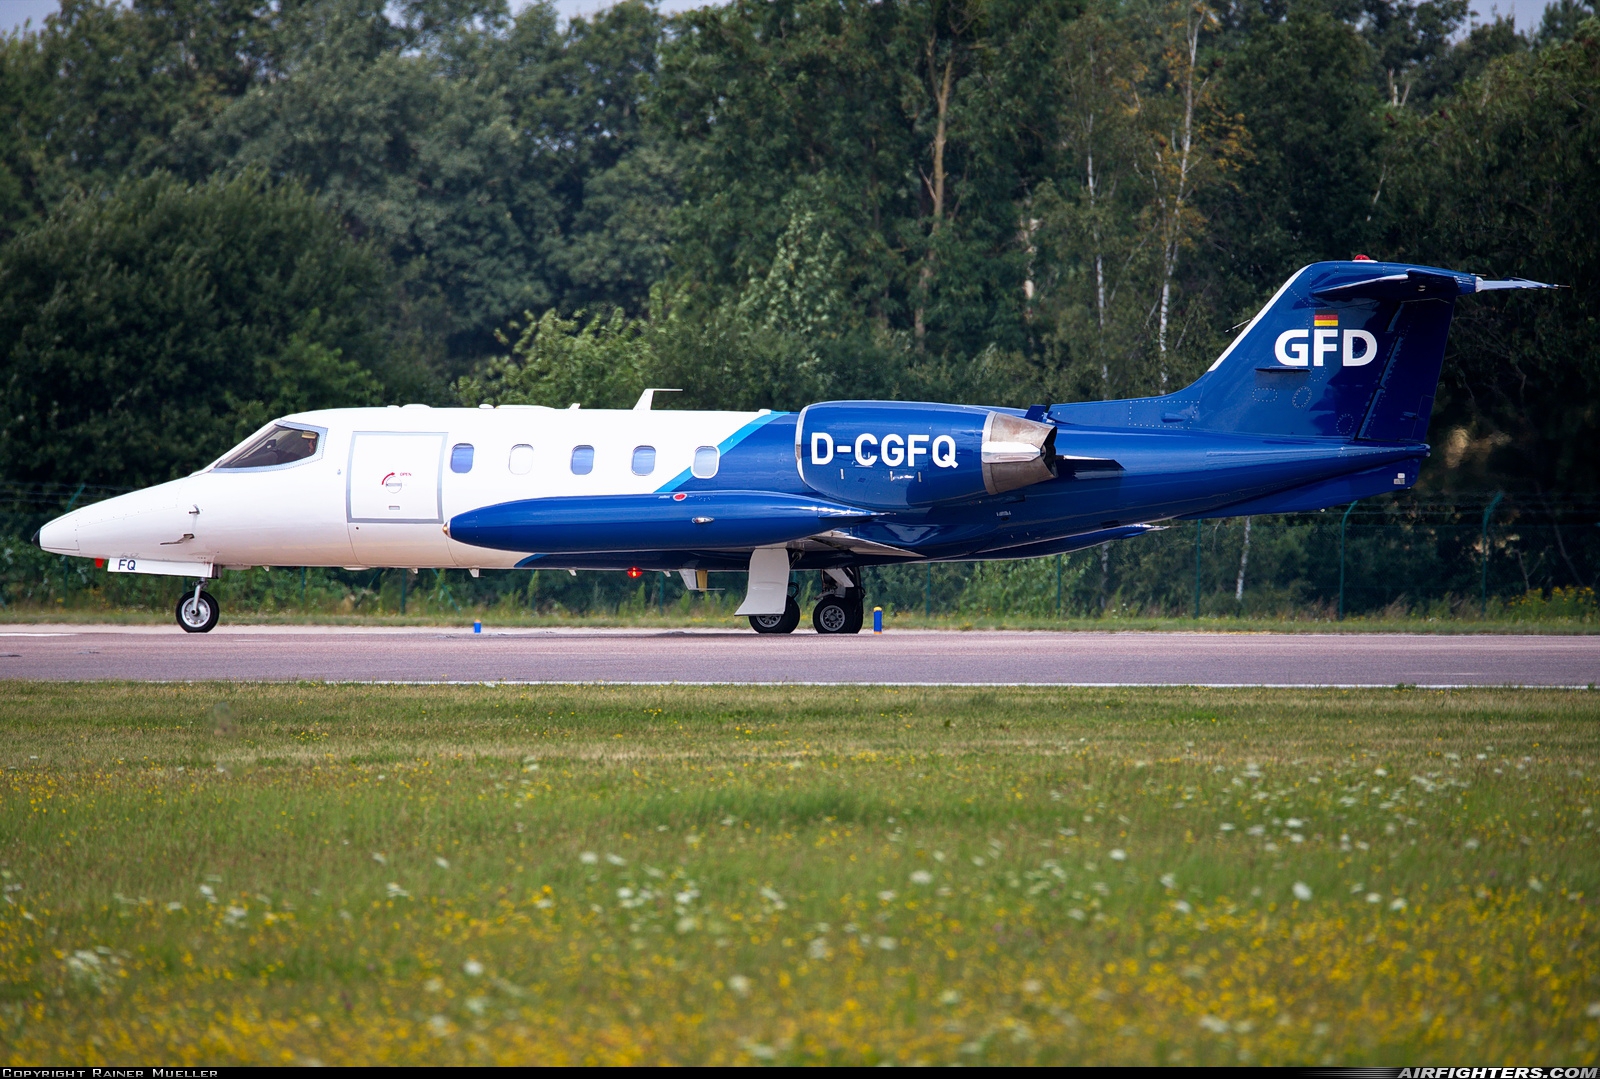 Company Owned - GFD Learjet 35A D-CGFQ at Wunstorf (ETNW), Germany